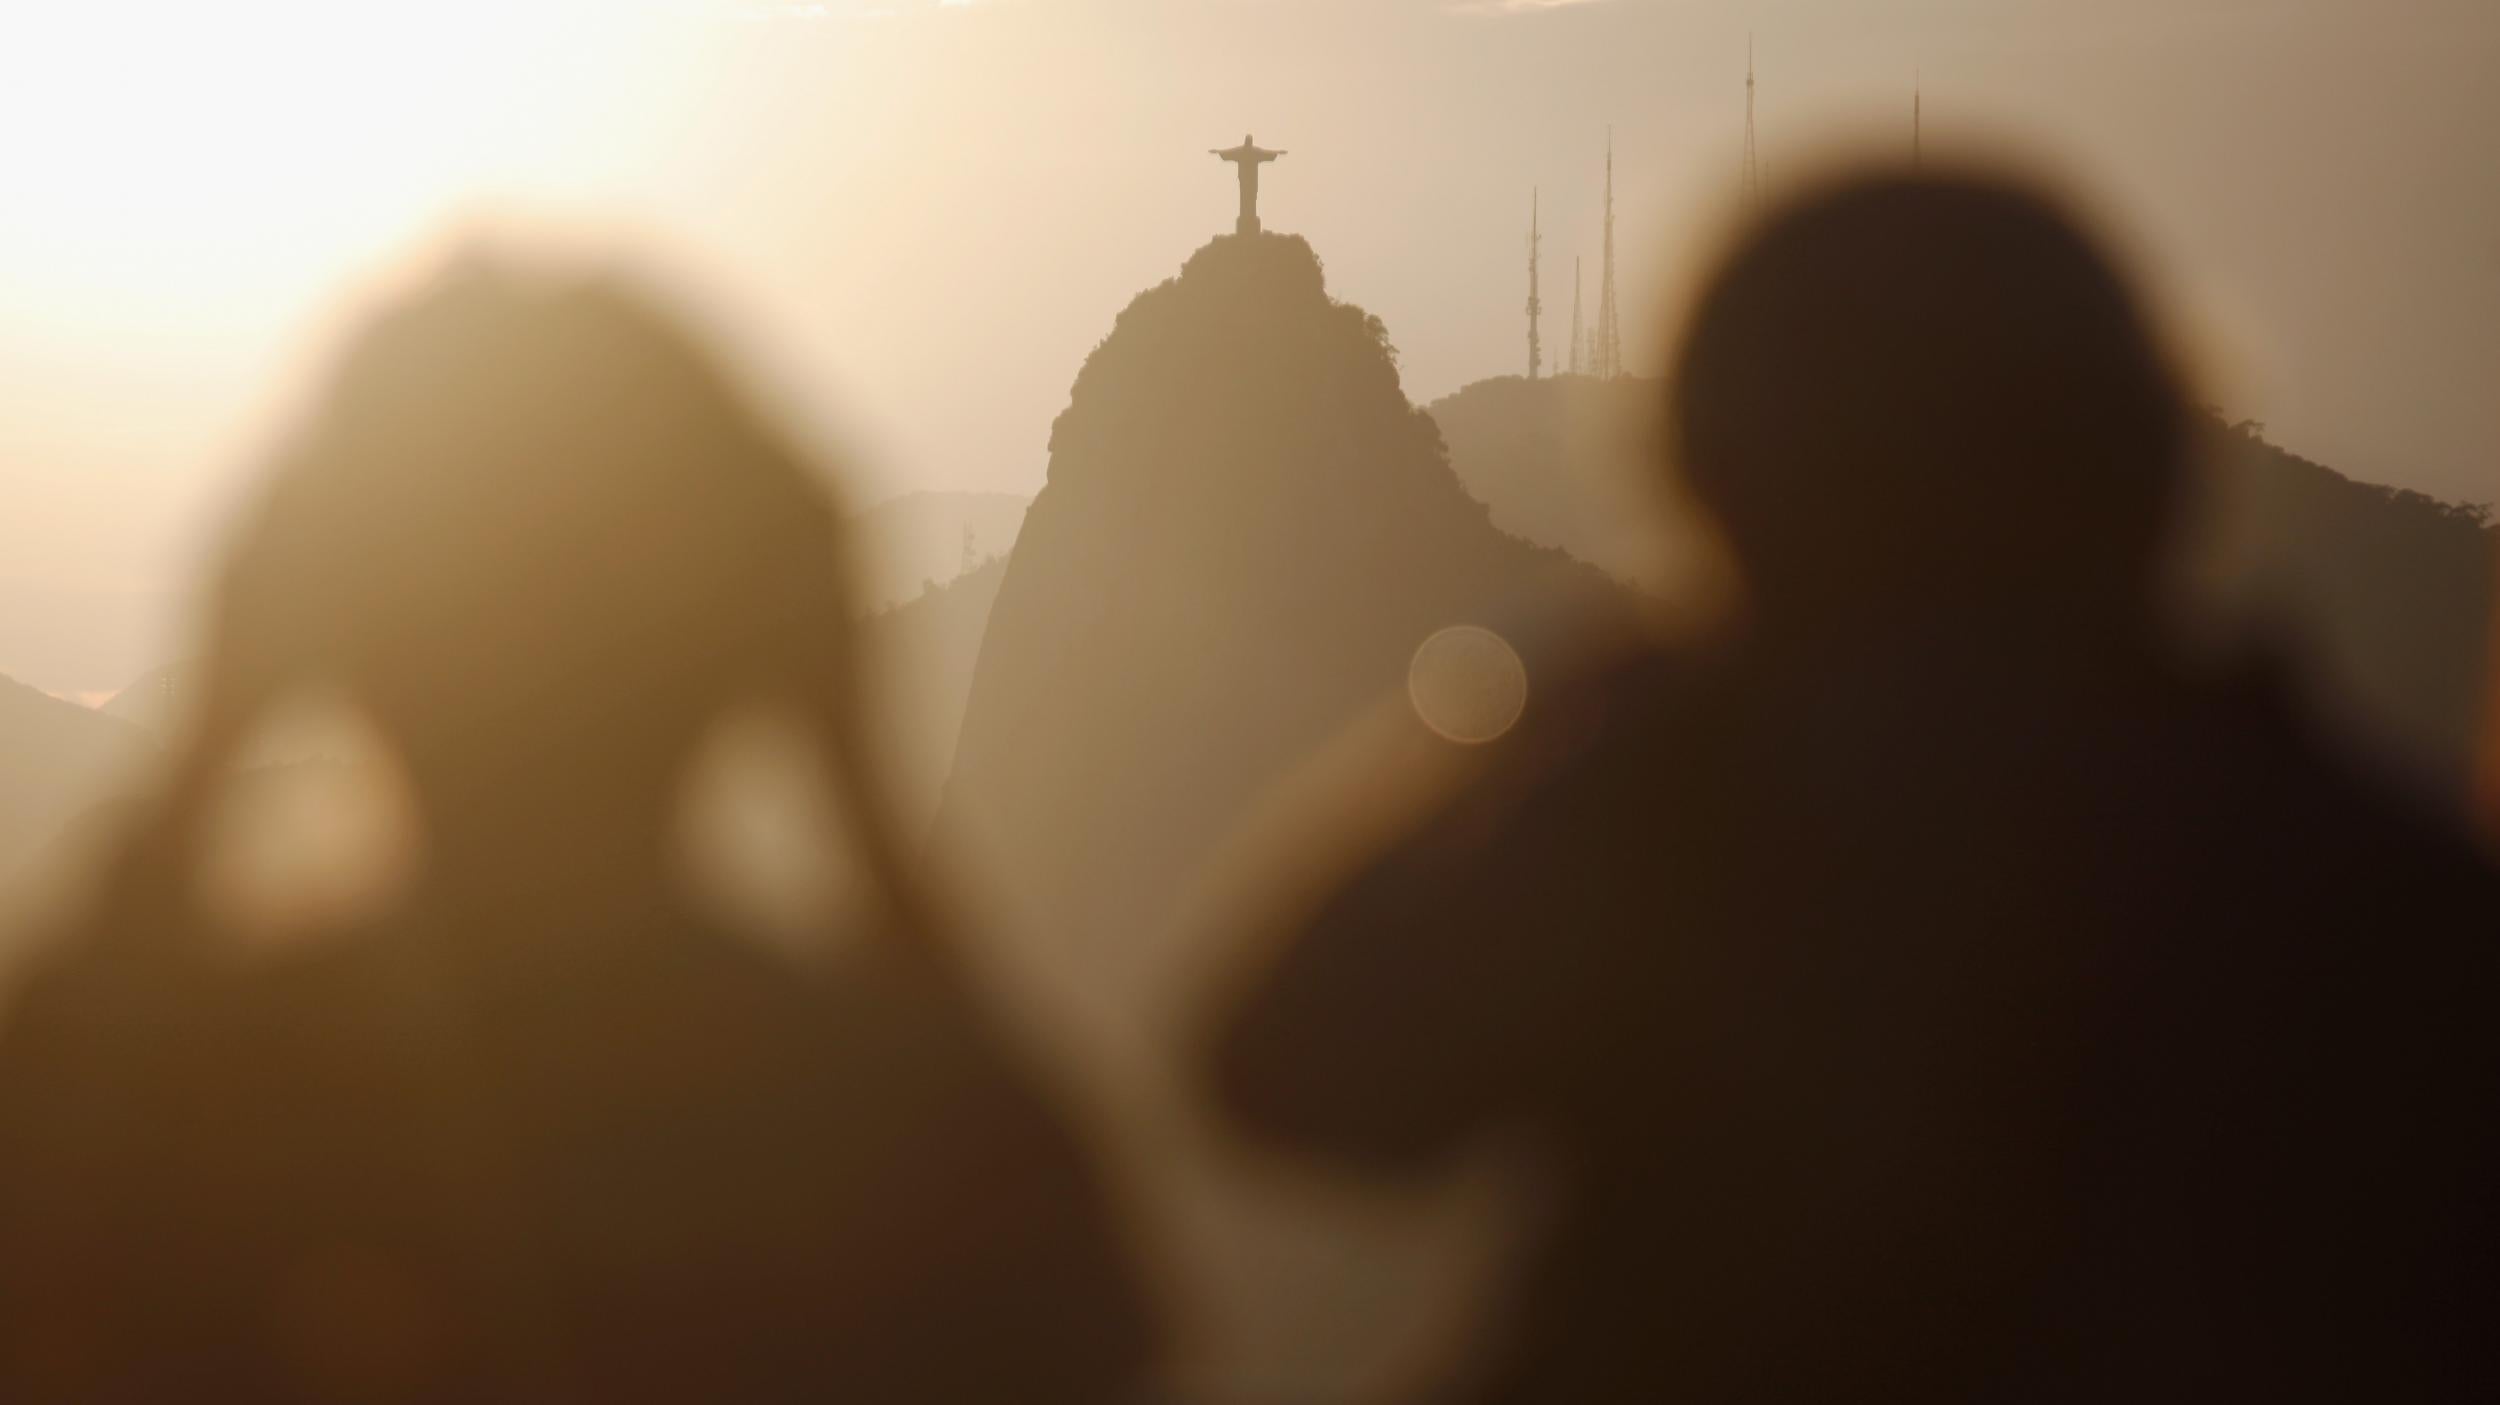 Visitors take photos of the Christ the Redeemer statue from atop the famed Sugar Loaf Mountain, as concerns rise of the impact of the Zika epidemic on Brazil's tourism (Getty)